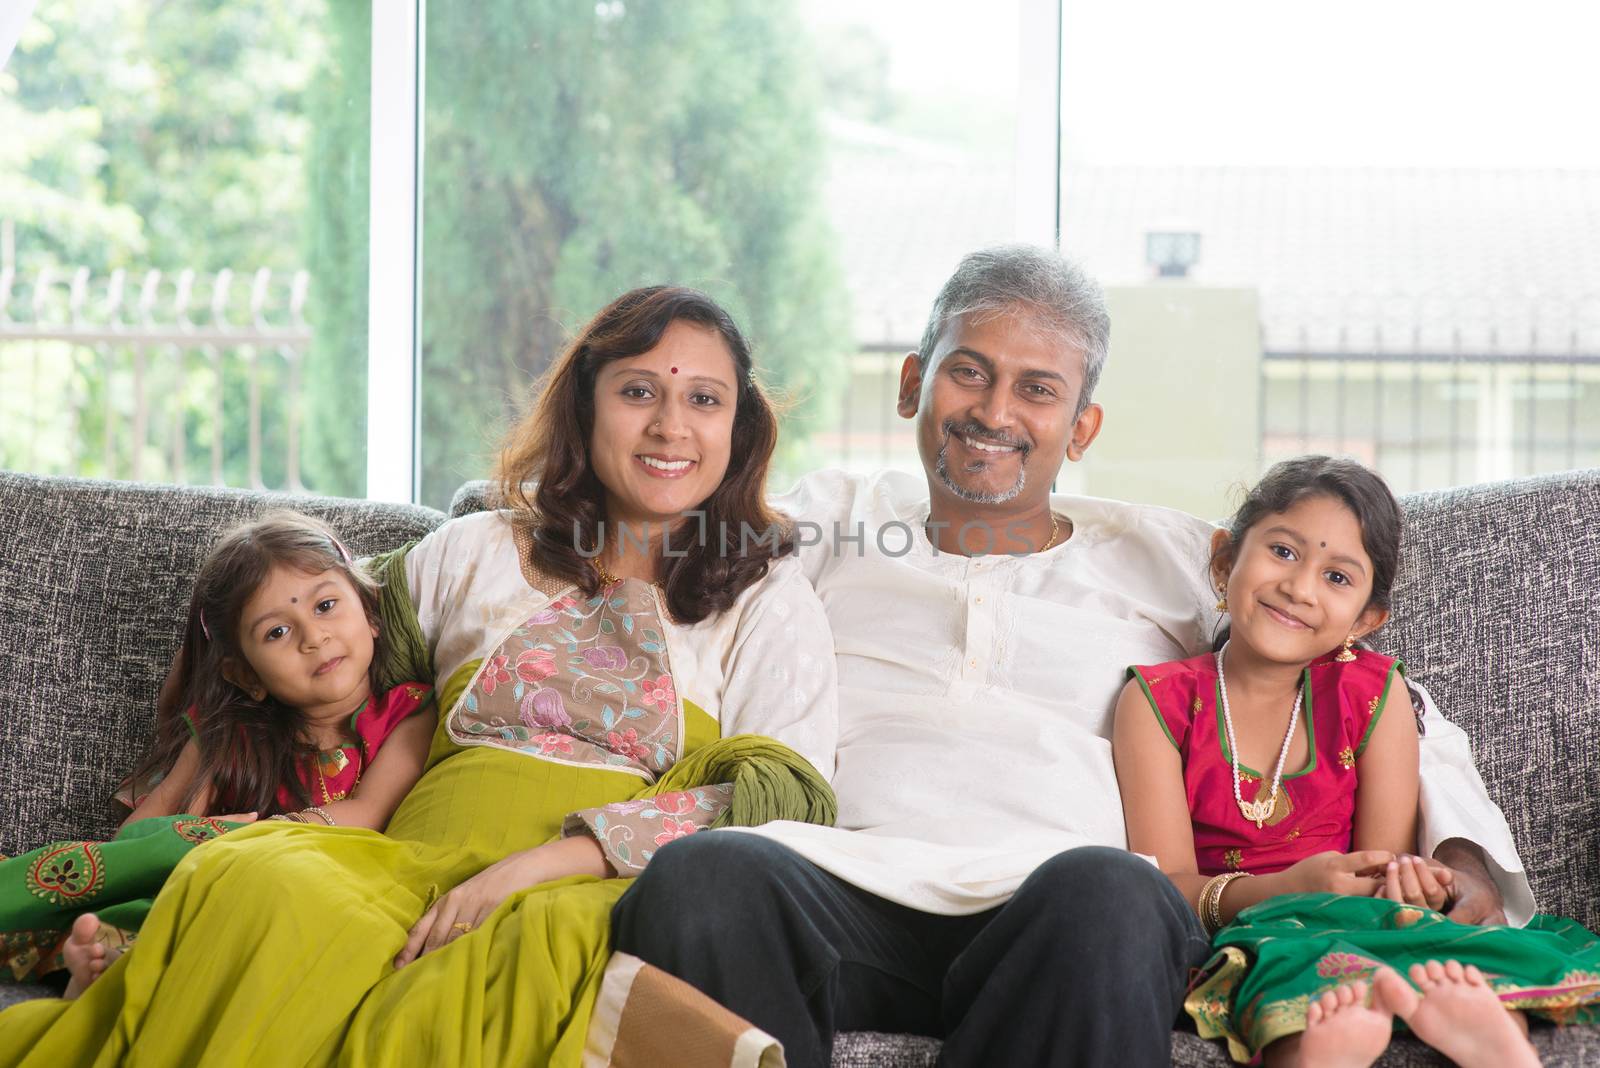 Indian family at home. Asian parents and children living lifestyle, sitting on couch indoor smiling happily.